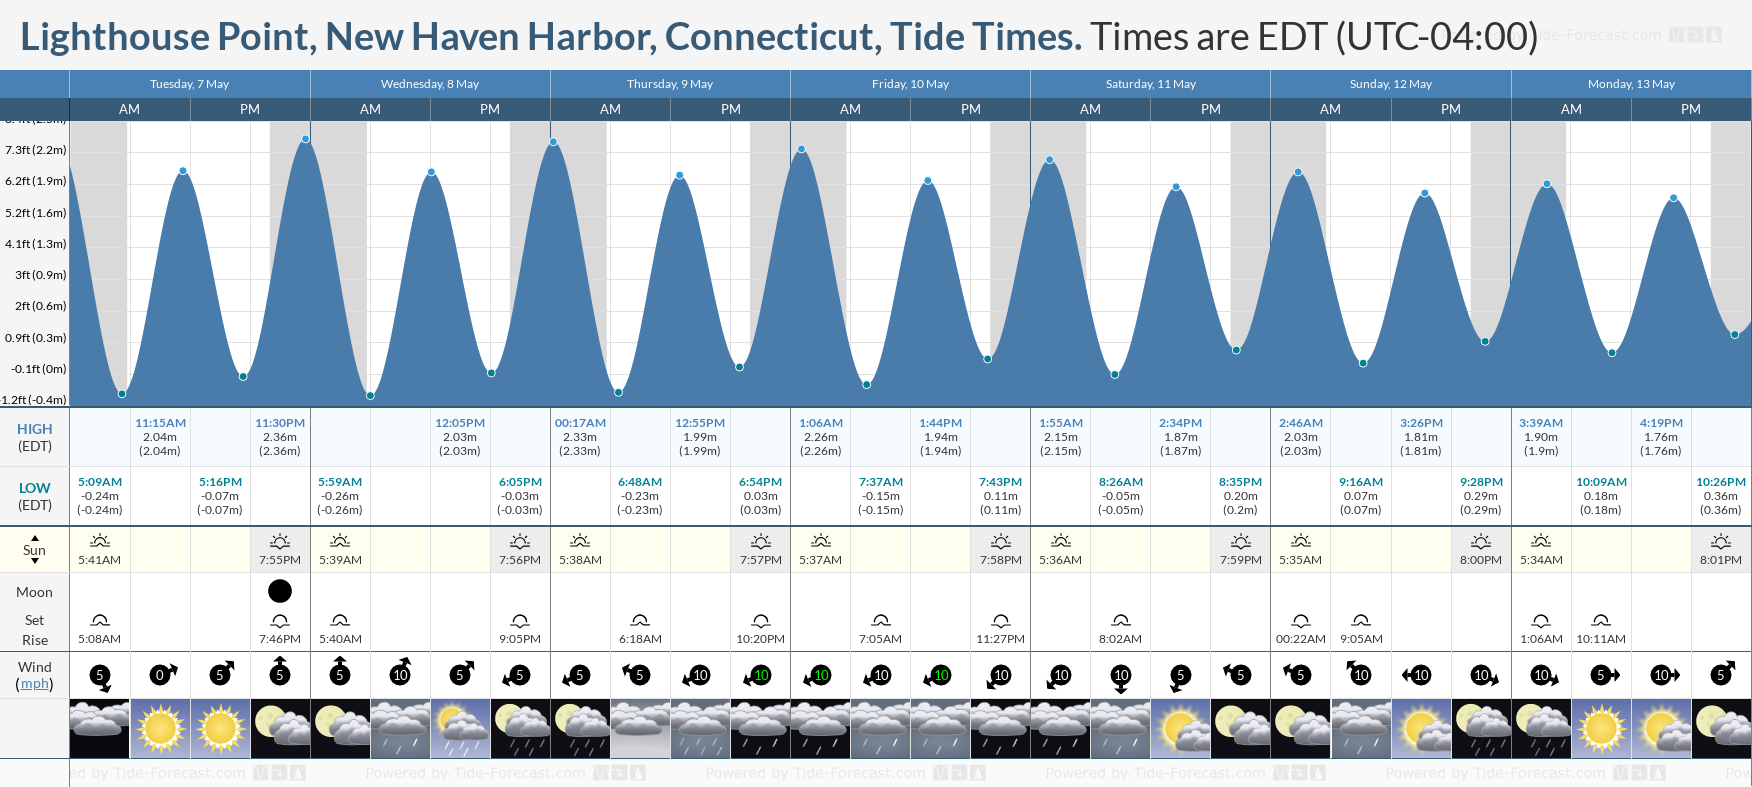 Lighthouse Point, New Haven Harbor, Connecticut Tide Chart including high and low tide tide times for the next 7 days